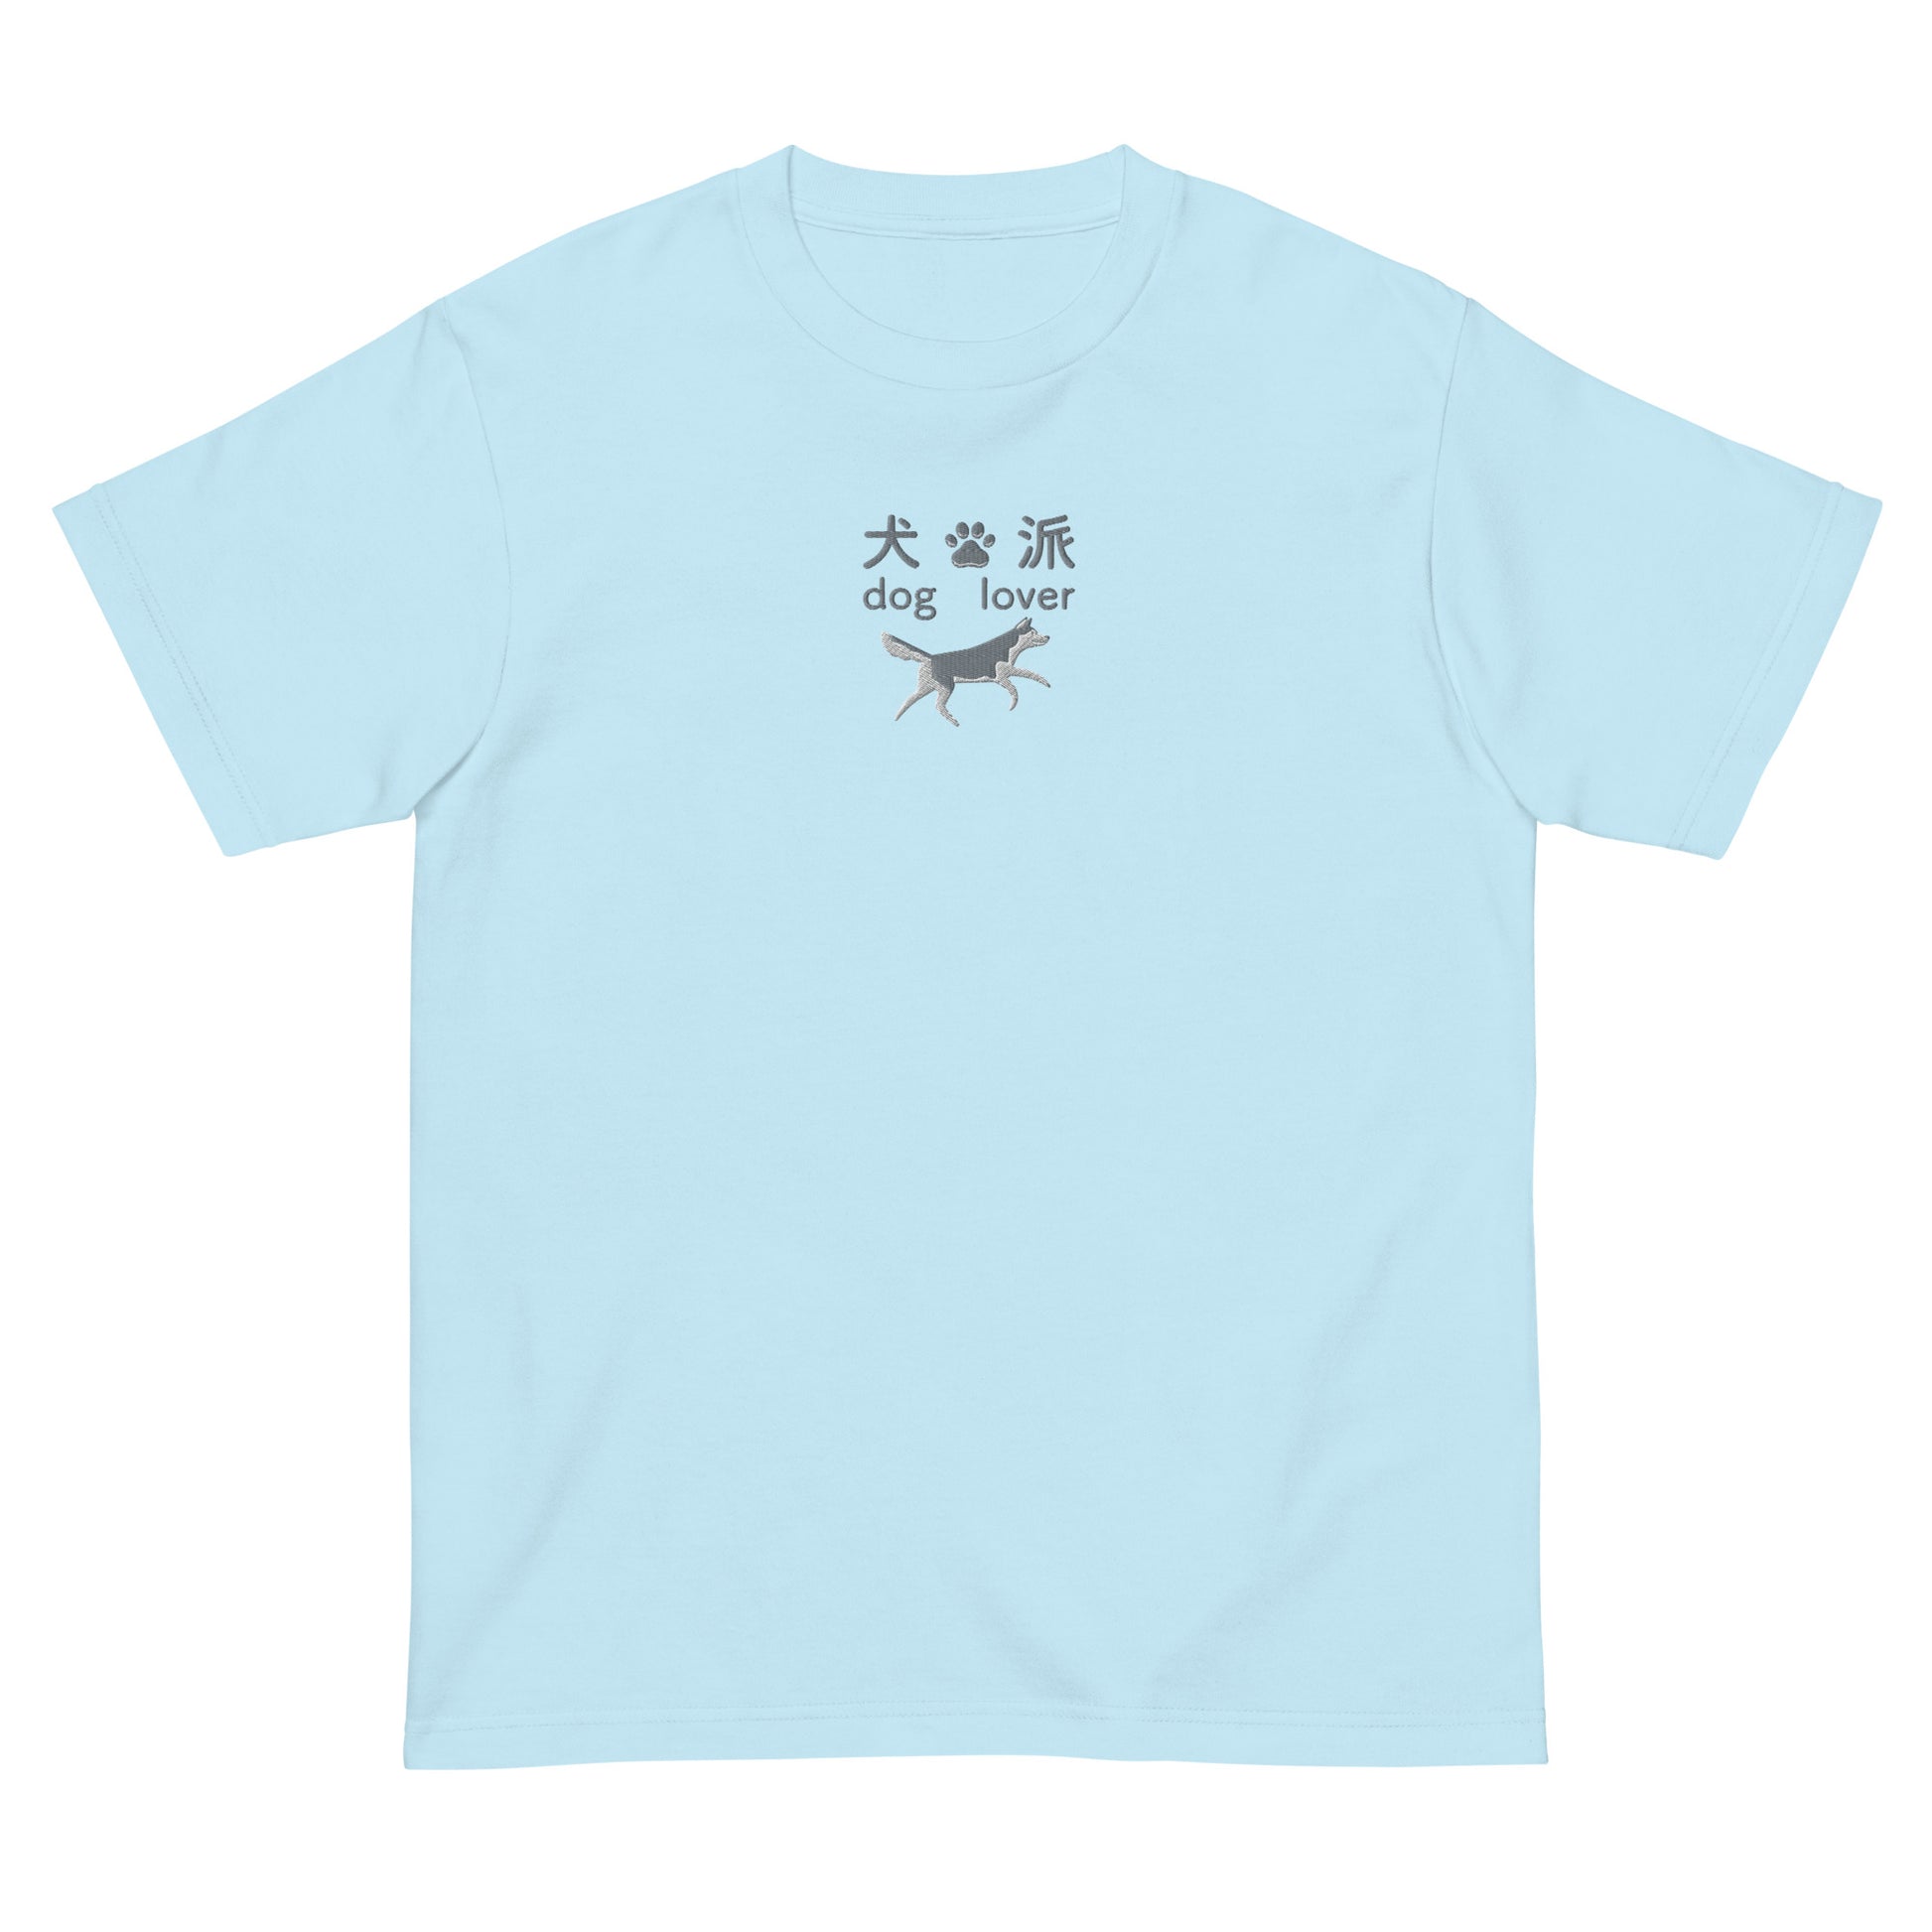 Light Blue High Quality Tee - Front Design with an Gray, White Embroidery "Dog Lover" in Japanese,Chinese and English, and Dog Embroidery